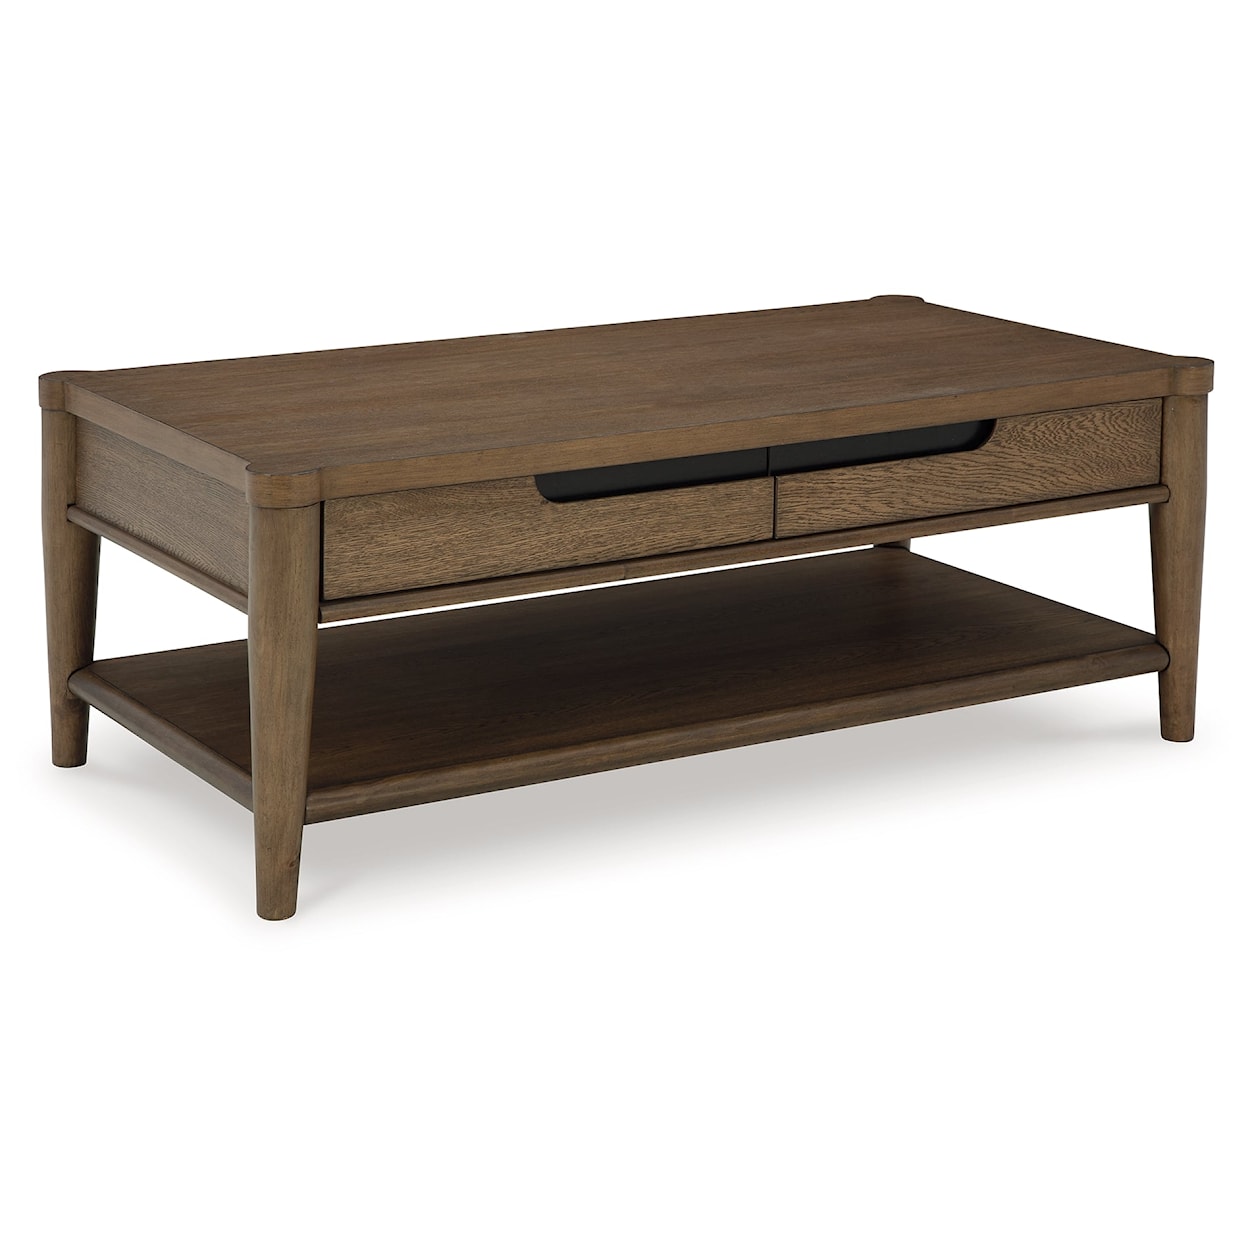 Benchcraft Roanhowe Coffee Table and 2 End Tables